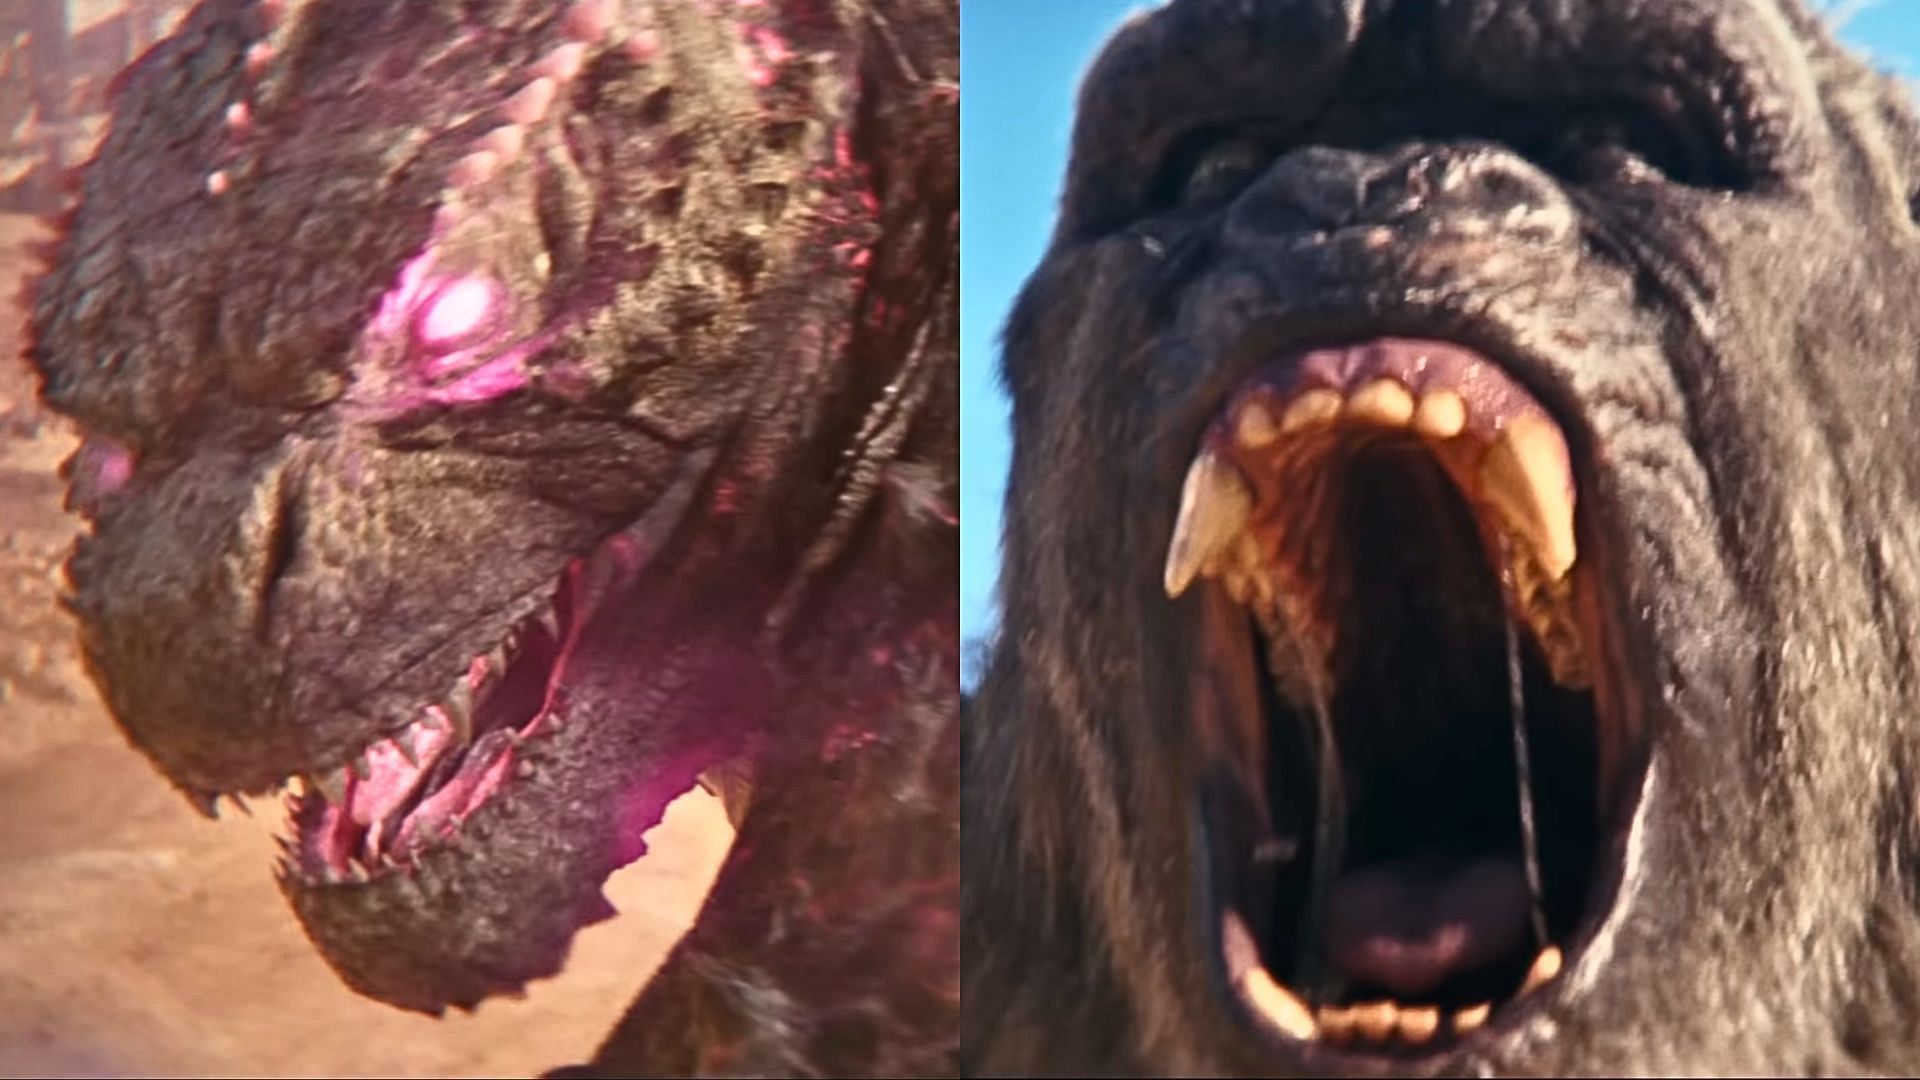 Godzilla x Kong: The New Empire features Godzilla (L) and Kong (R) facing off against a colossal threat (Images via YouTube/Warner Bros. 2:15 and 2:17)